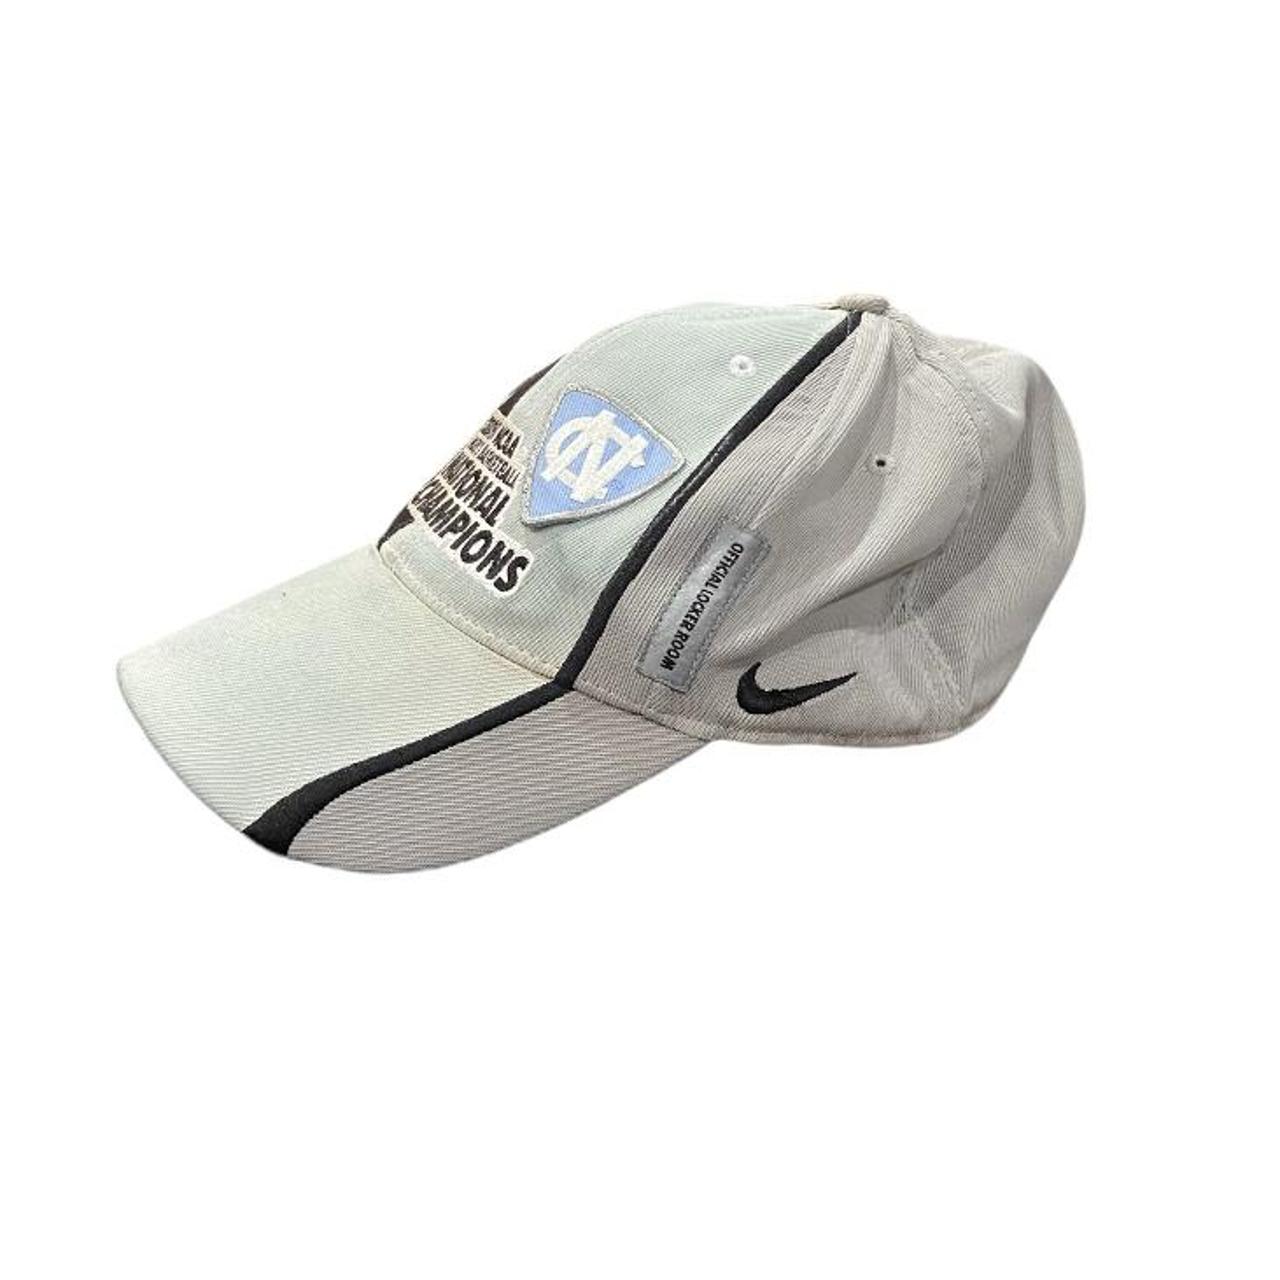 Nike Men's Grey and Blue Hat (2)